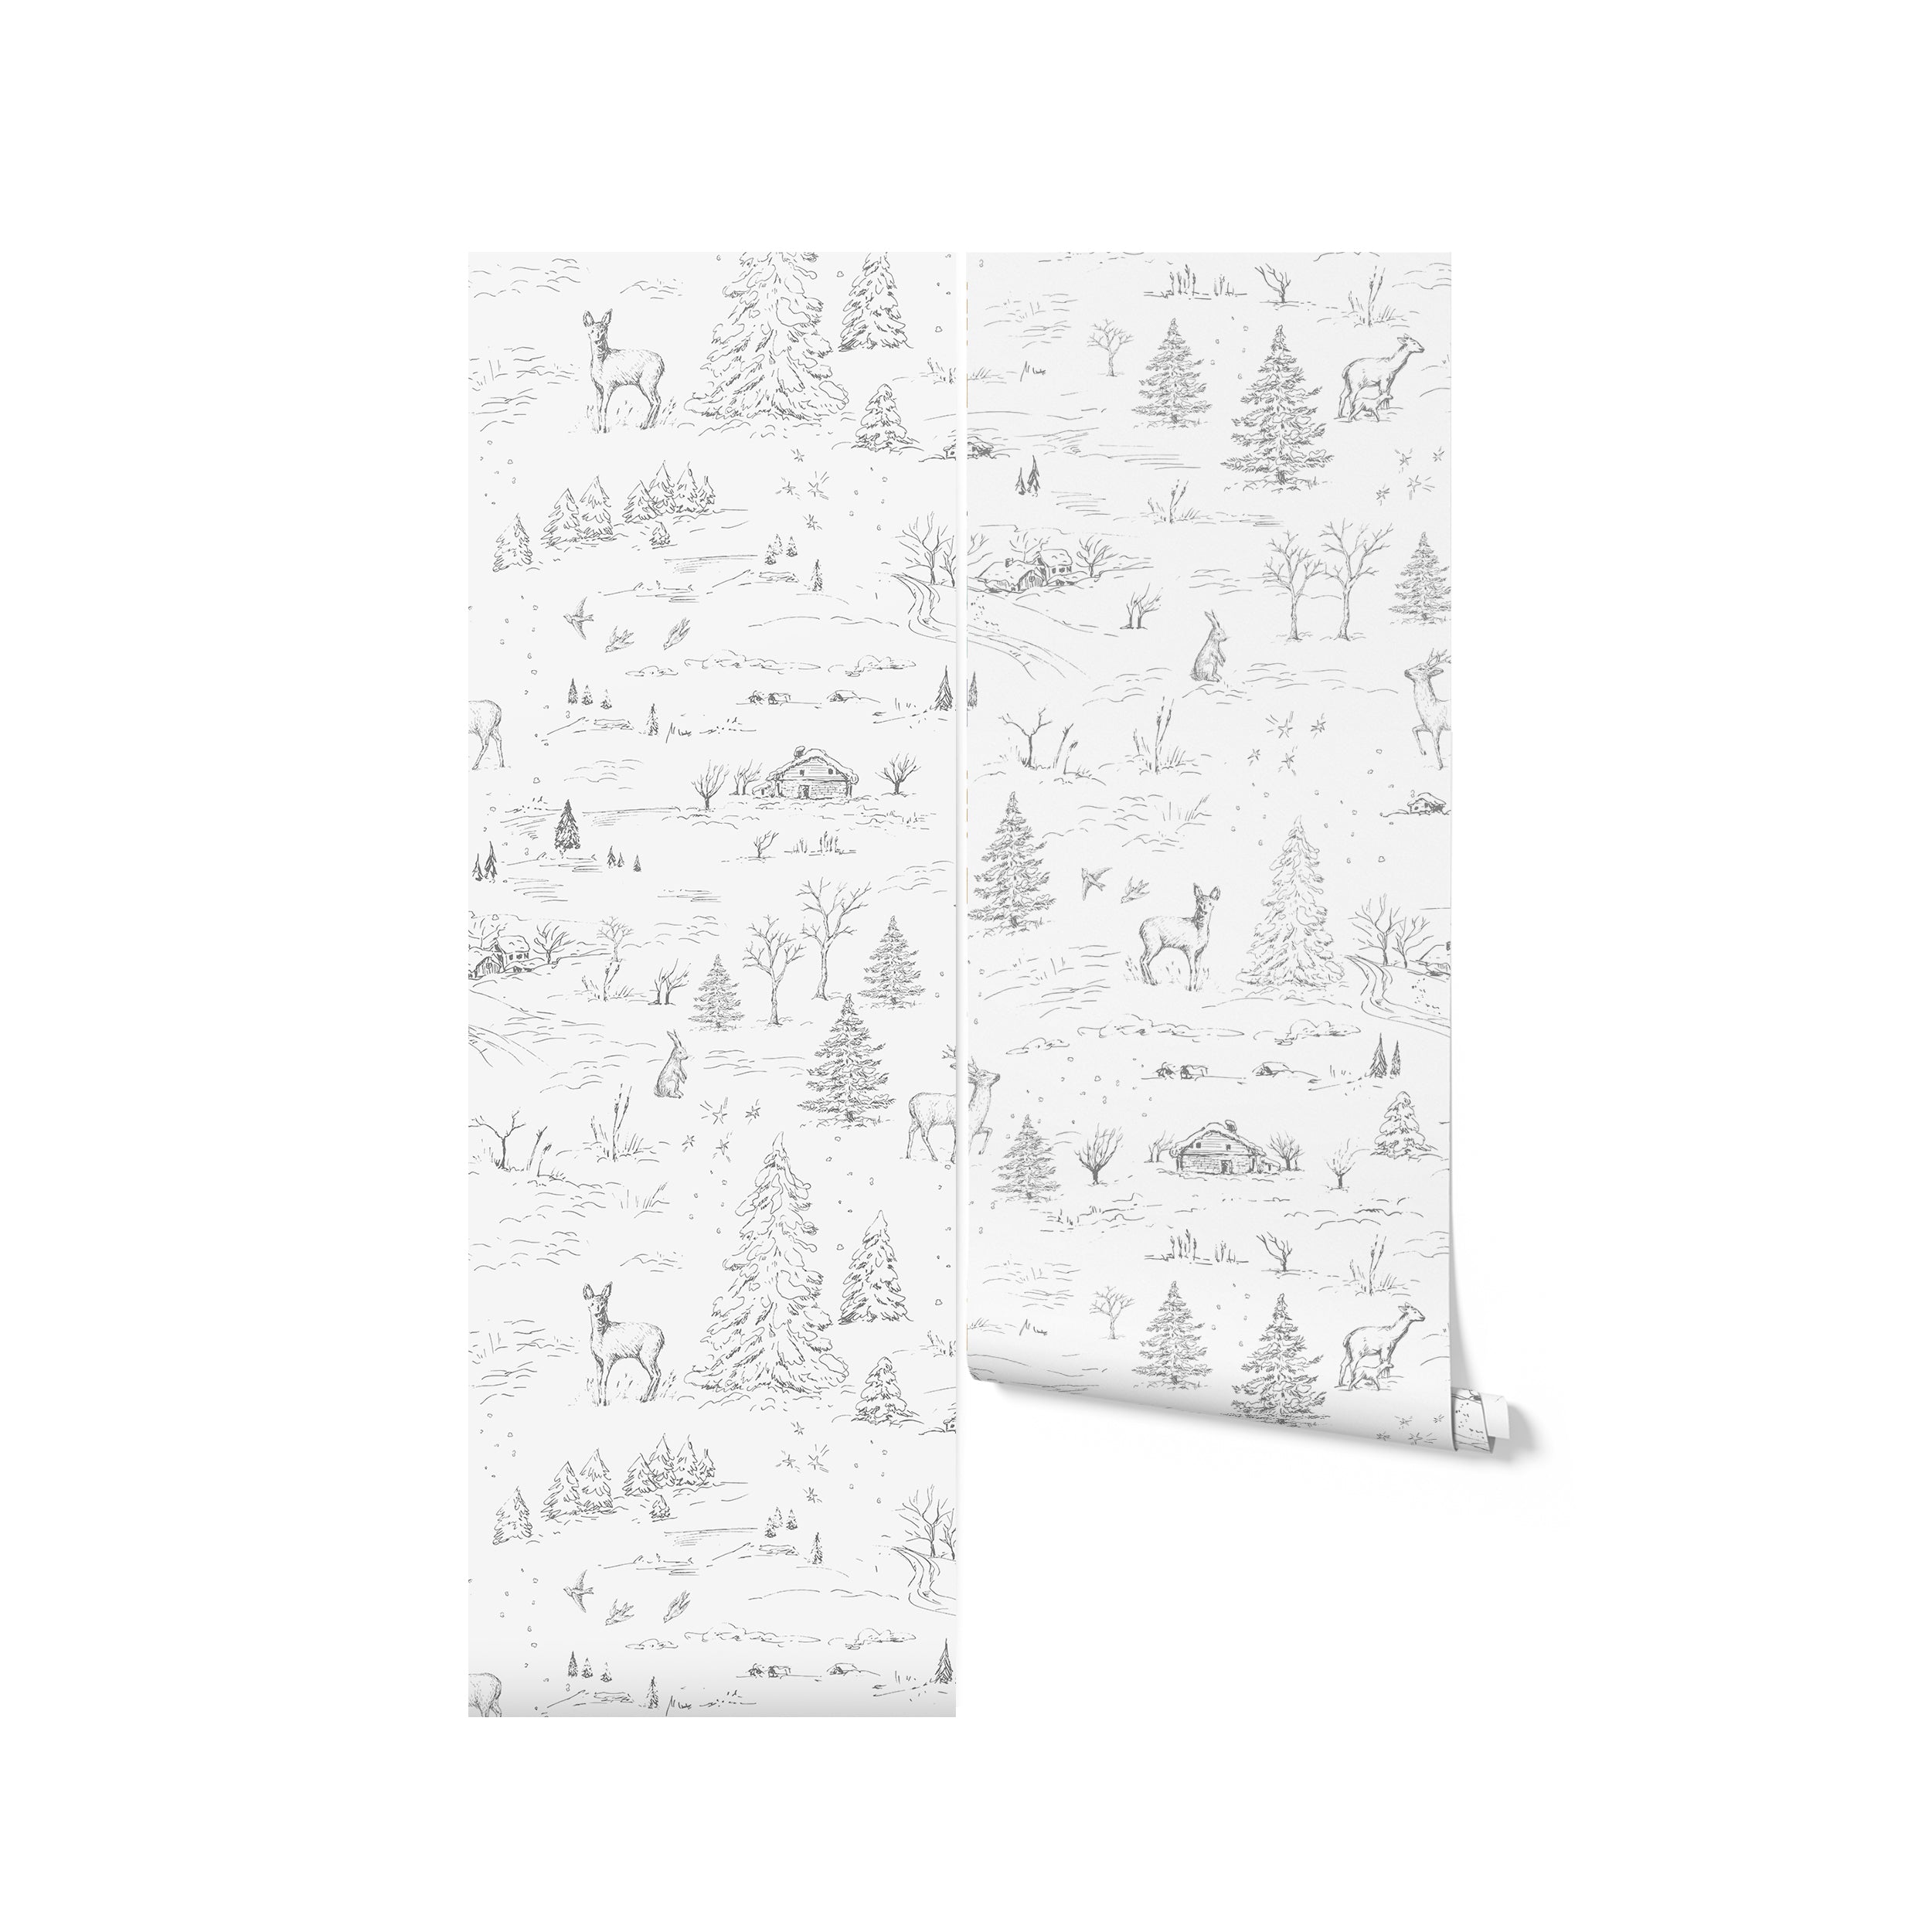 A single roll of winter-themed wallpaper featuring a monochrome sketch of a pastoral scene with deer, pine trees, and cozy cabins, all delicately illustrated against a white background